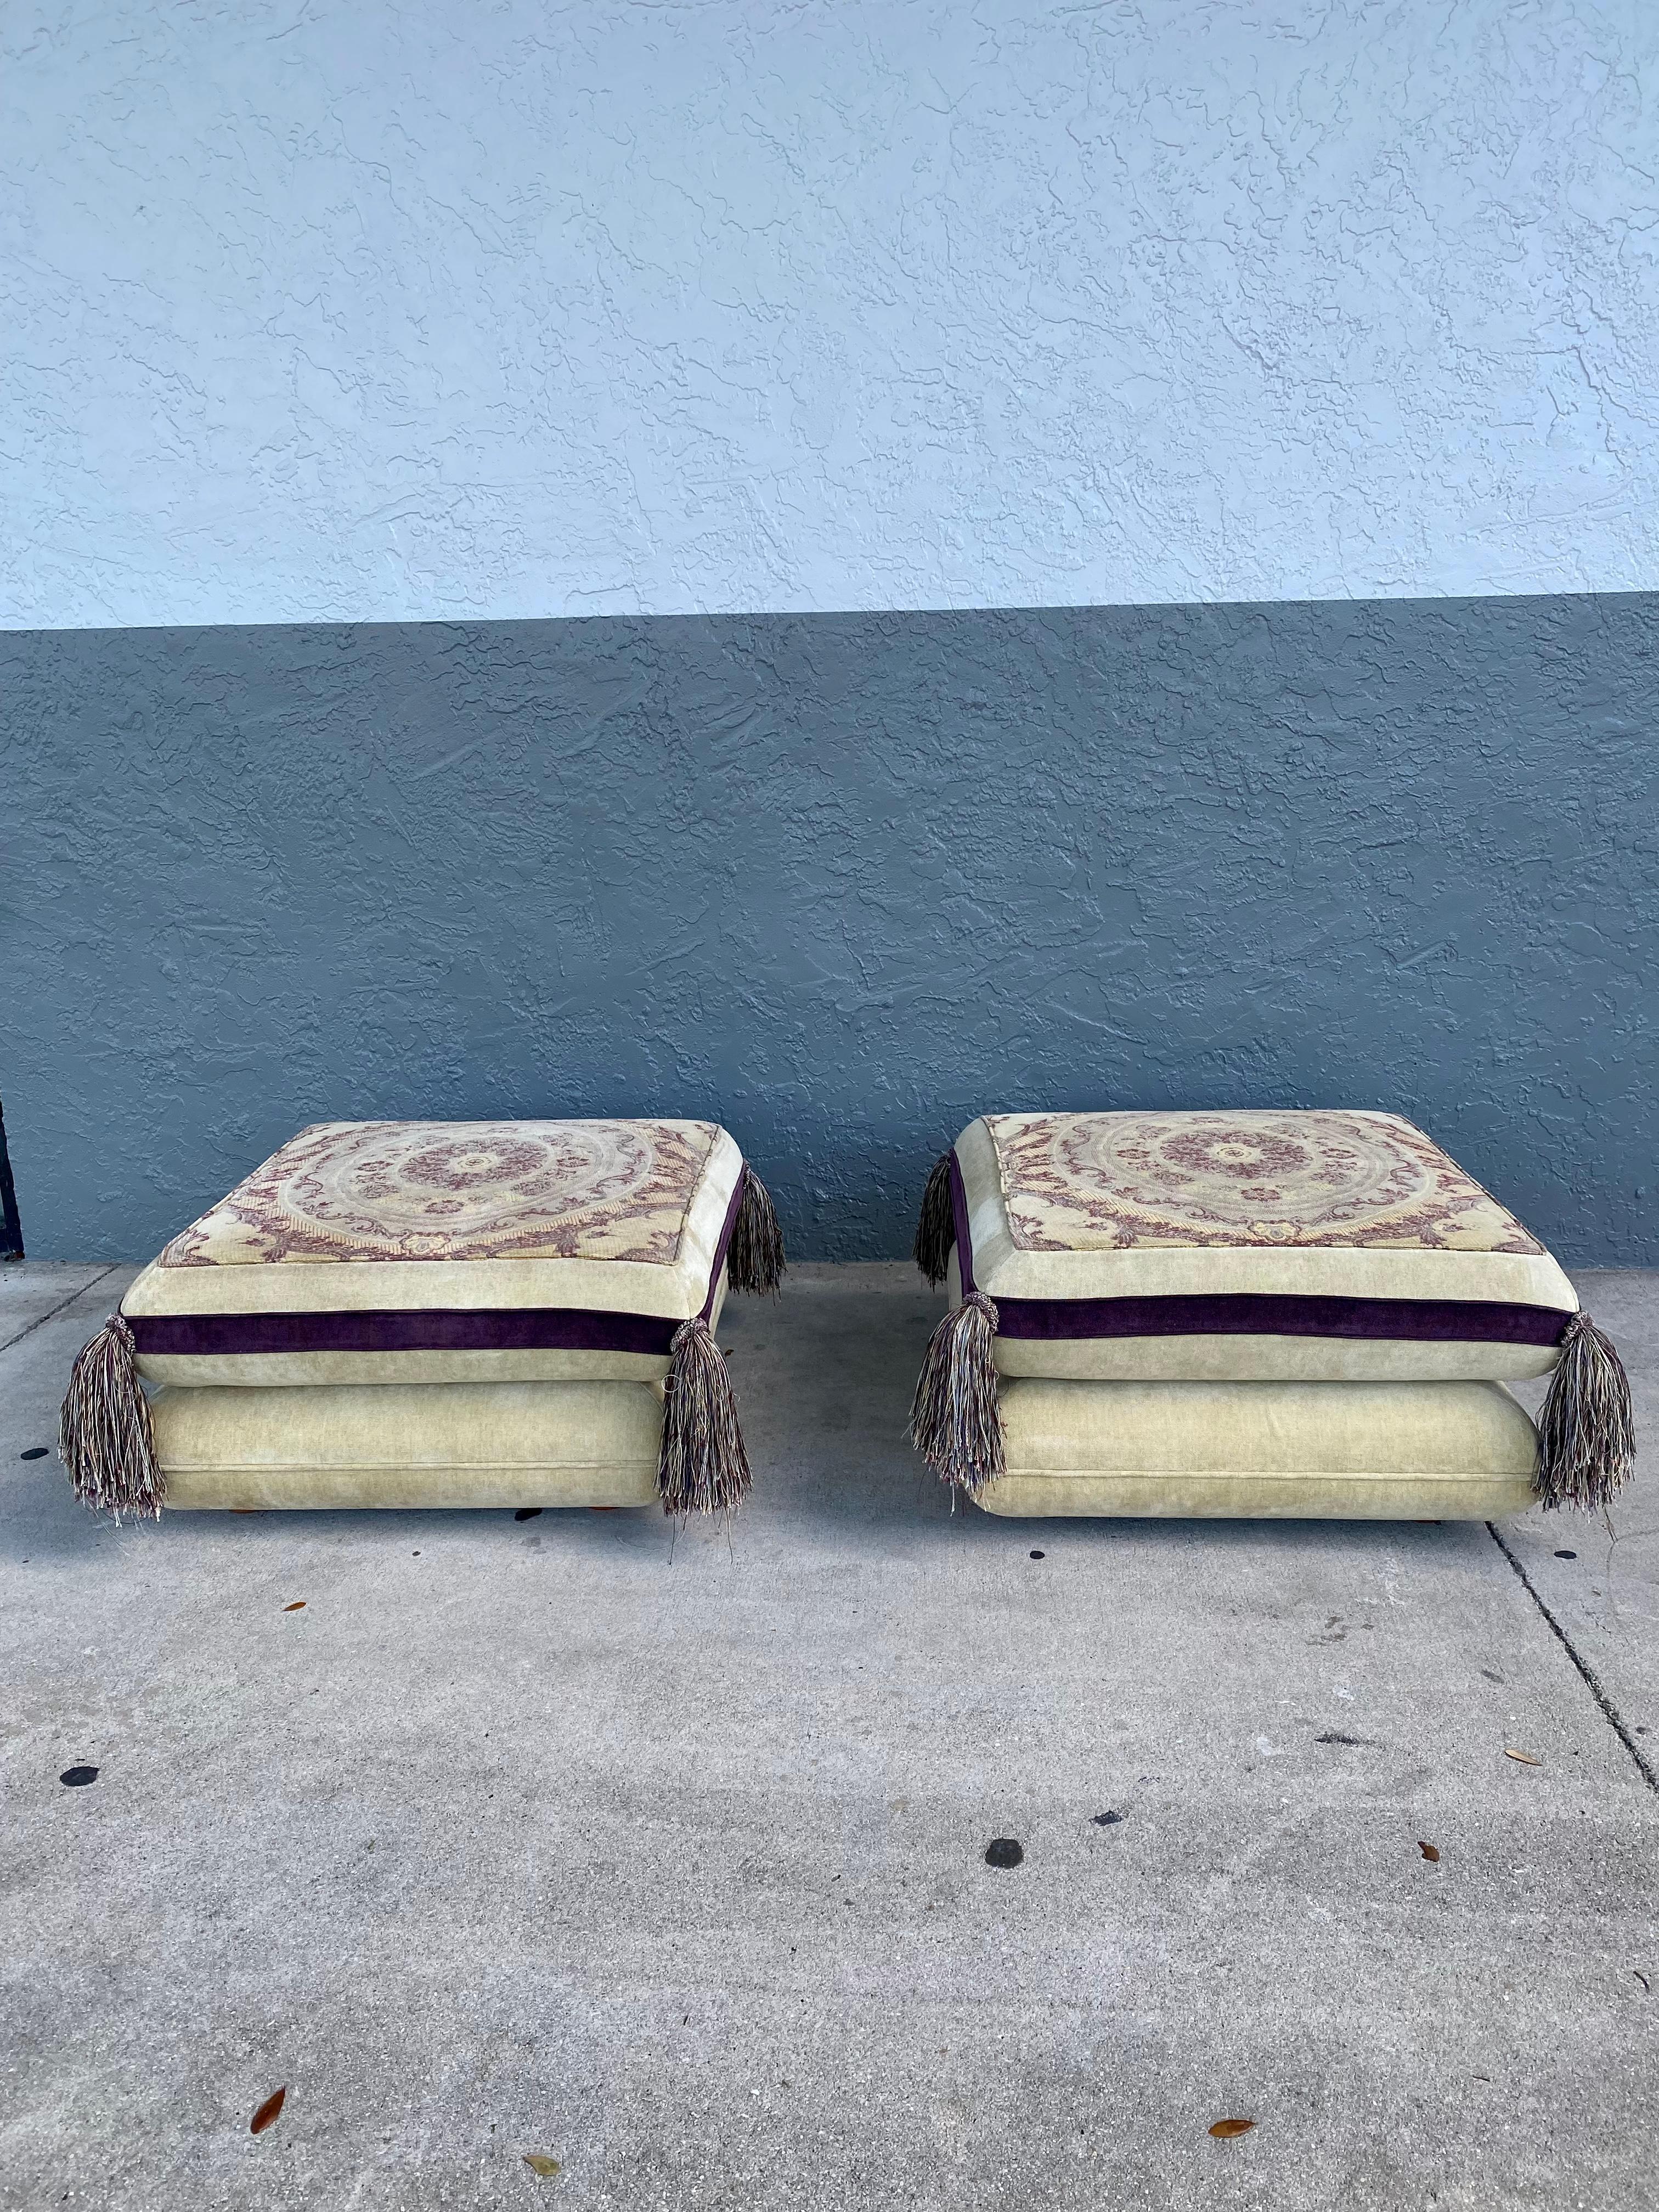 Rare Roche Bobois “Mah Jong” Style Floor Pillowtop Ottoman Stools, Set of 2 In Good Condition For Sale In Fort Lauderdale, FL